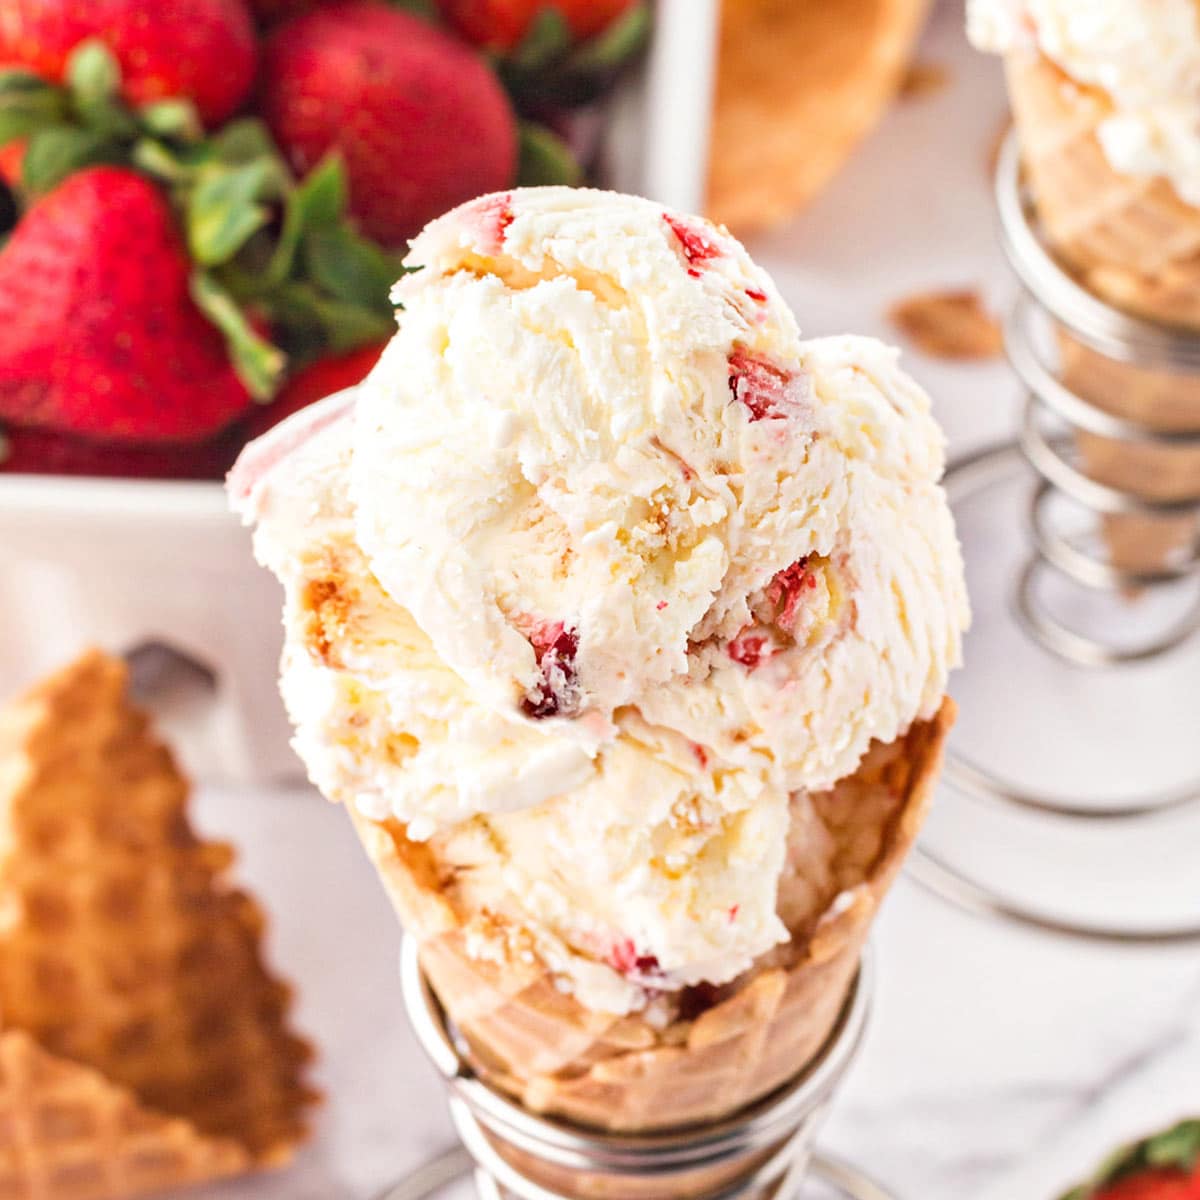 Top view of scooped No-Churn Strawberry Shortcake Ice Cream in a waffle cone with strawberries in the background.